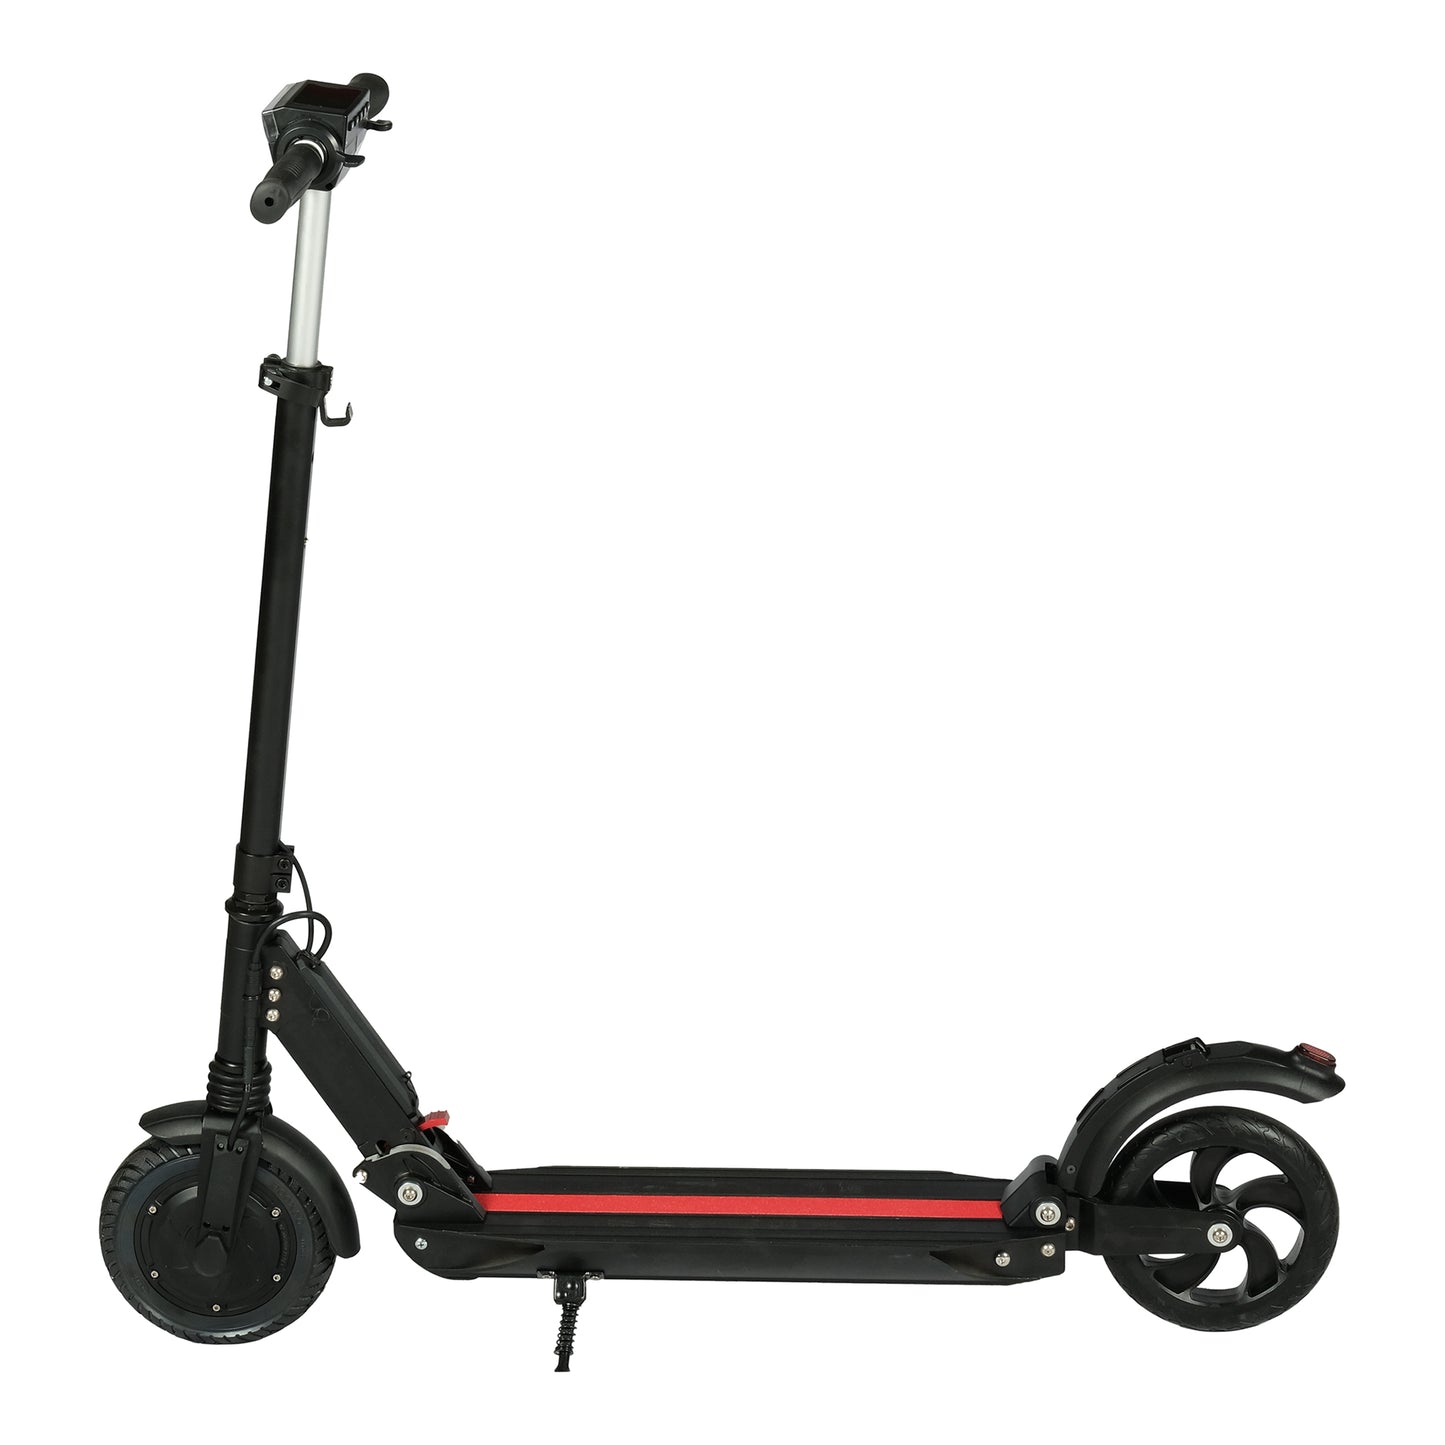 CRONY Q5 Foldable Electric Scooter Electric kick scooters 250W